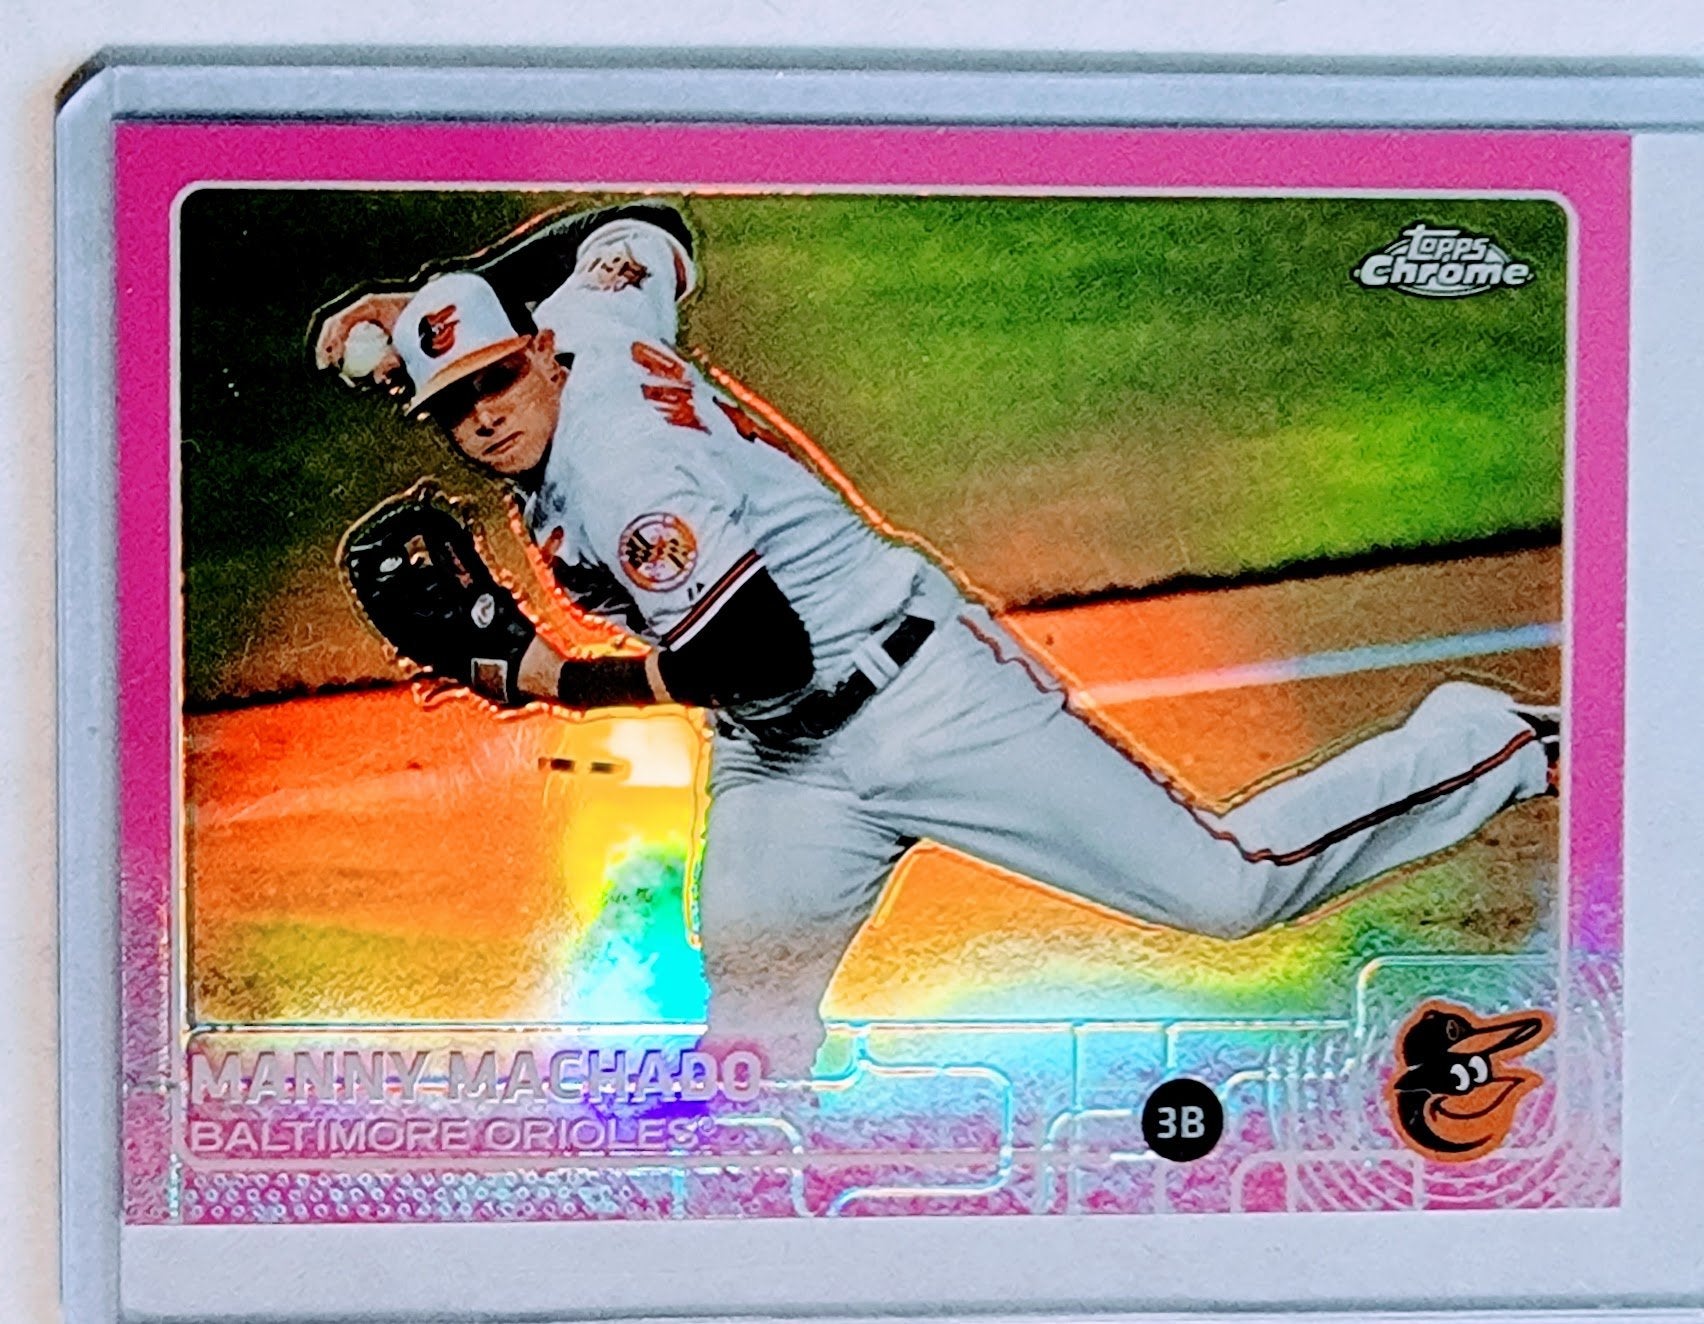 2013 Topps Chrome Manny Machado Pink Refractor Baseball Card TPTV simple Xclusive Collectibles   